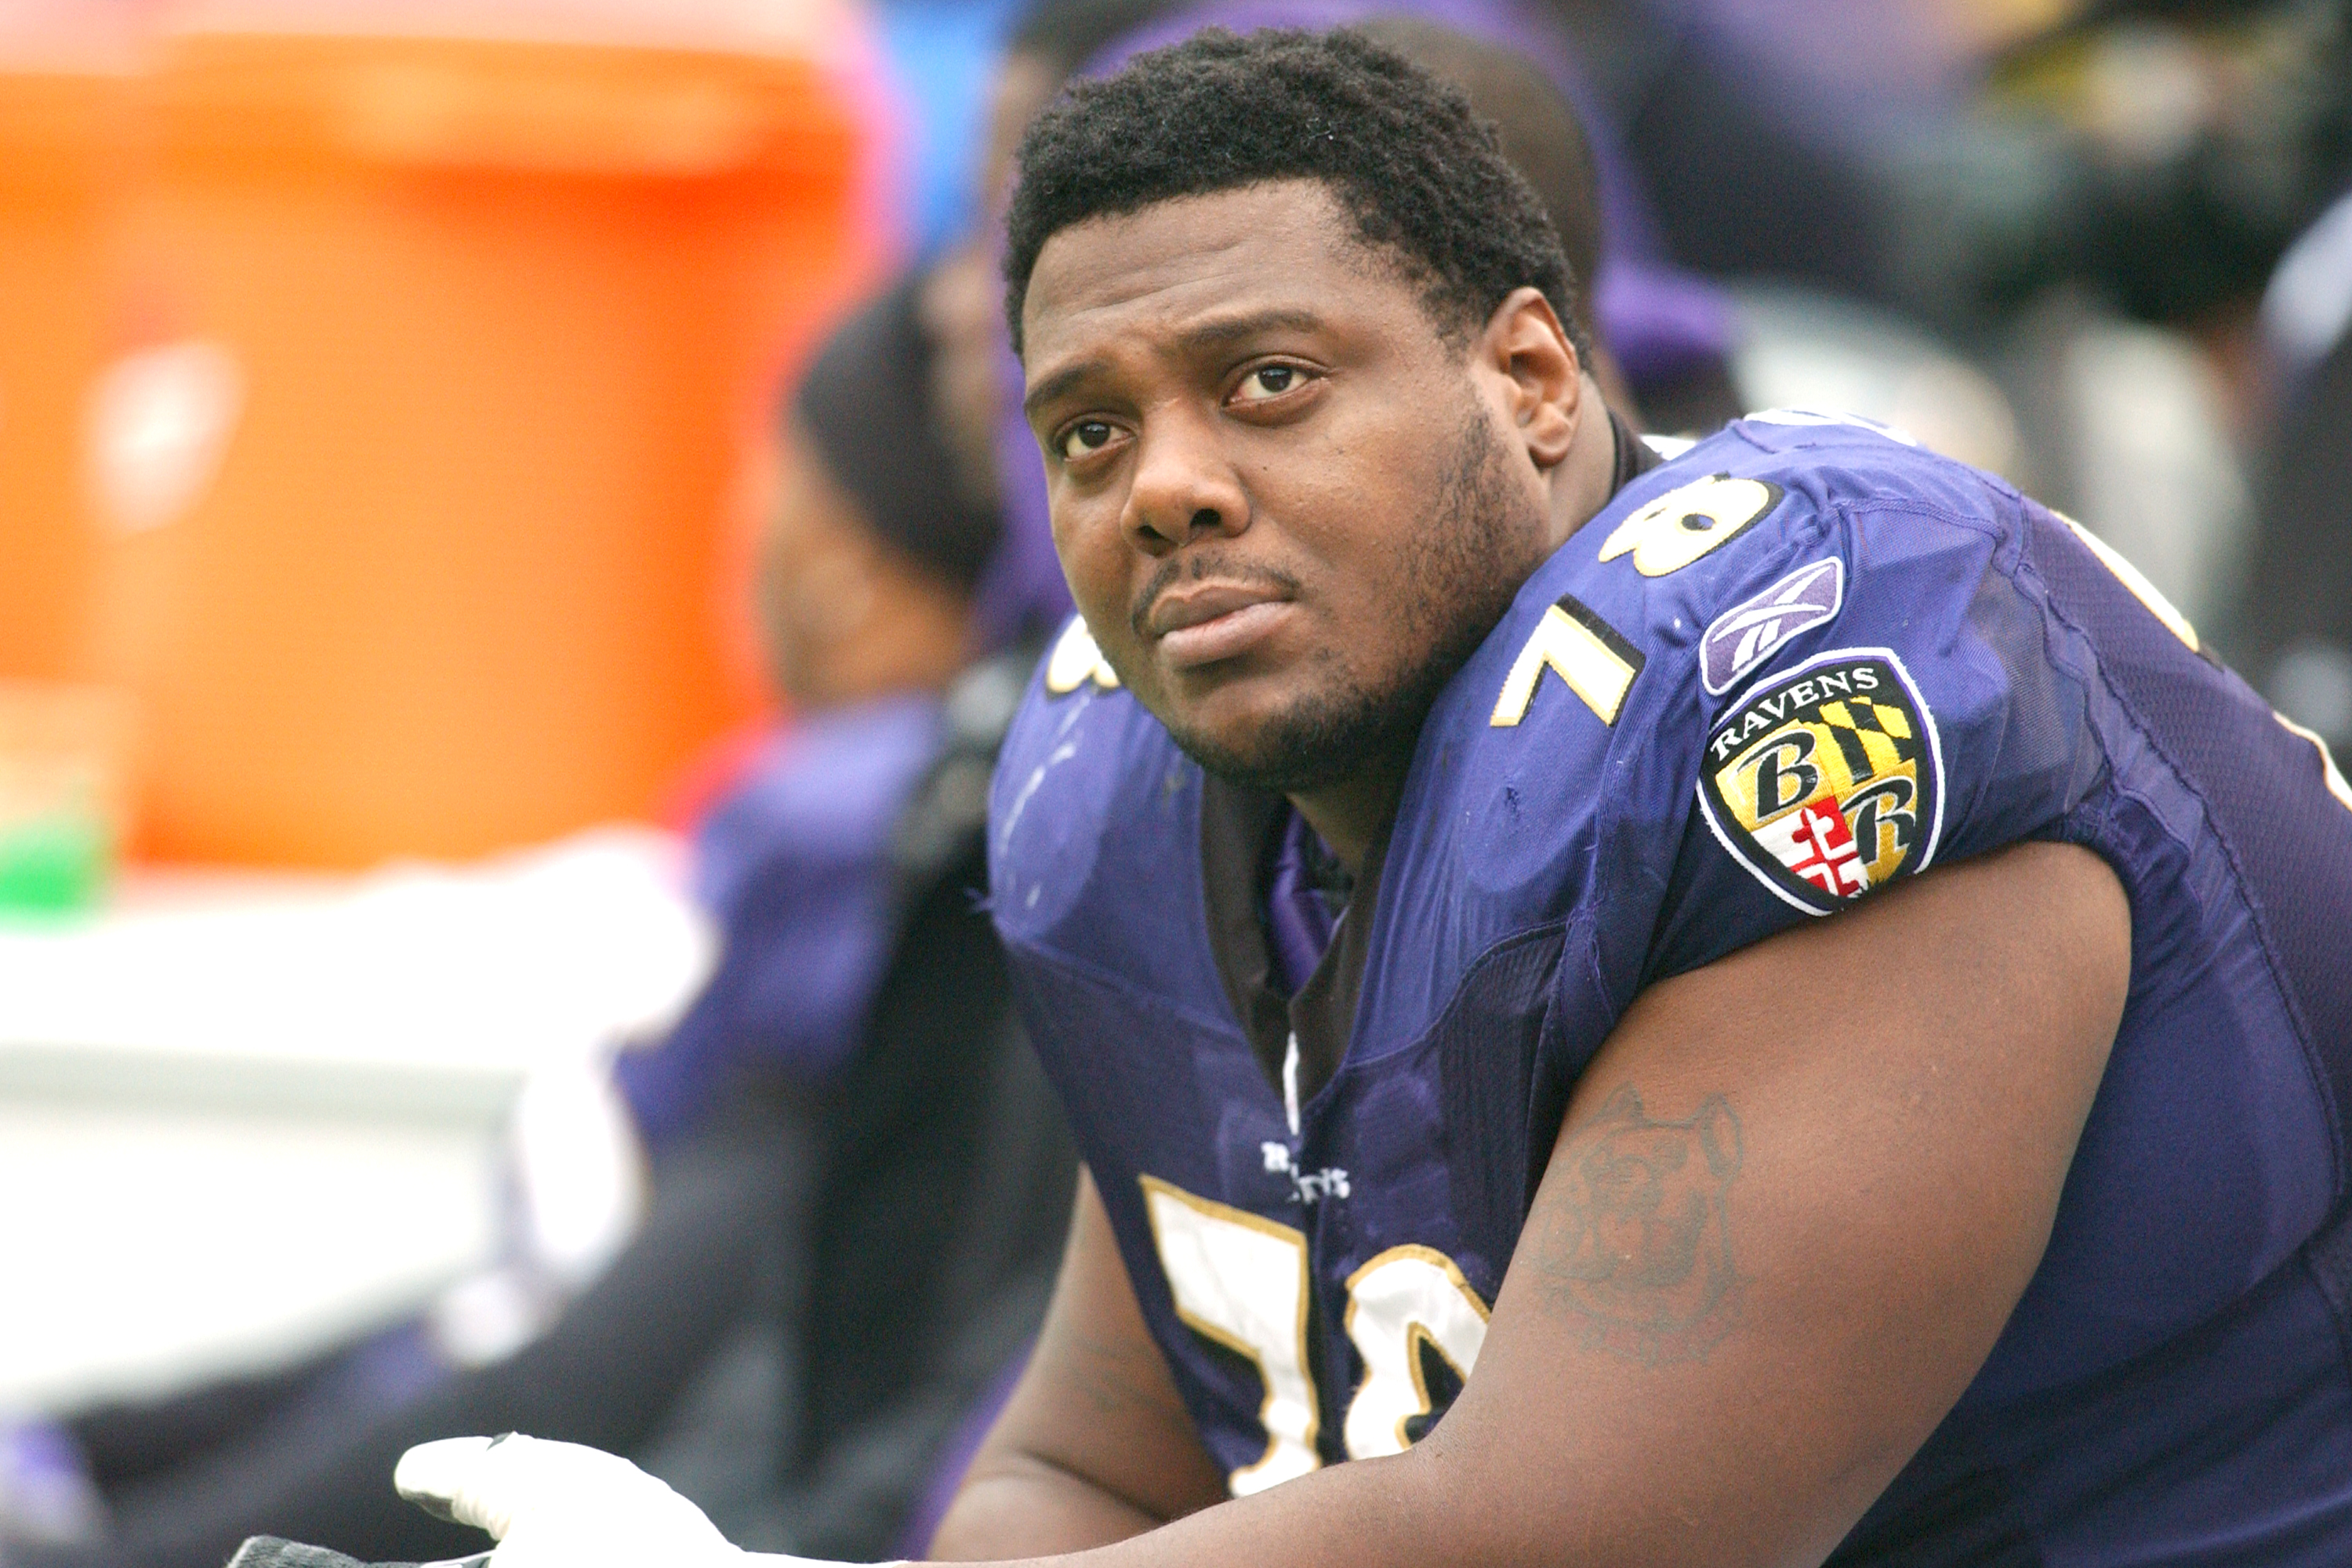 Ravens player Orlando Brown sits on the bench during a game